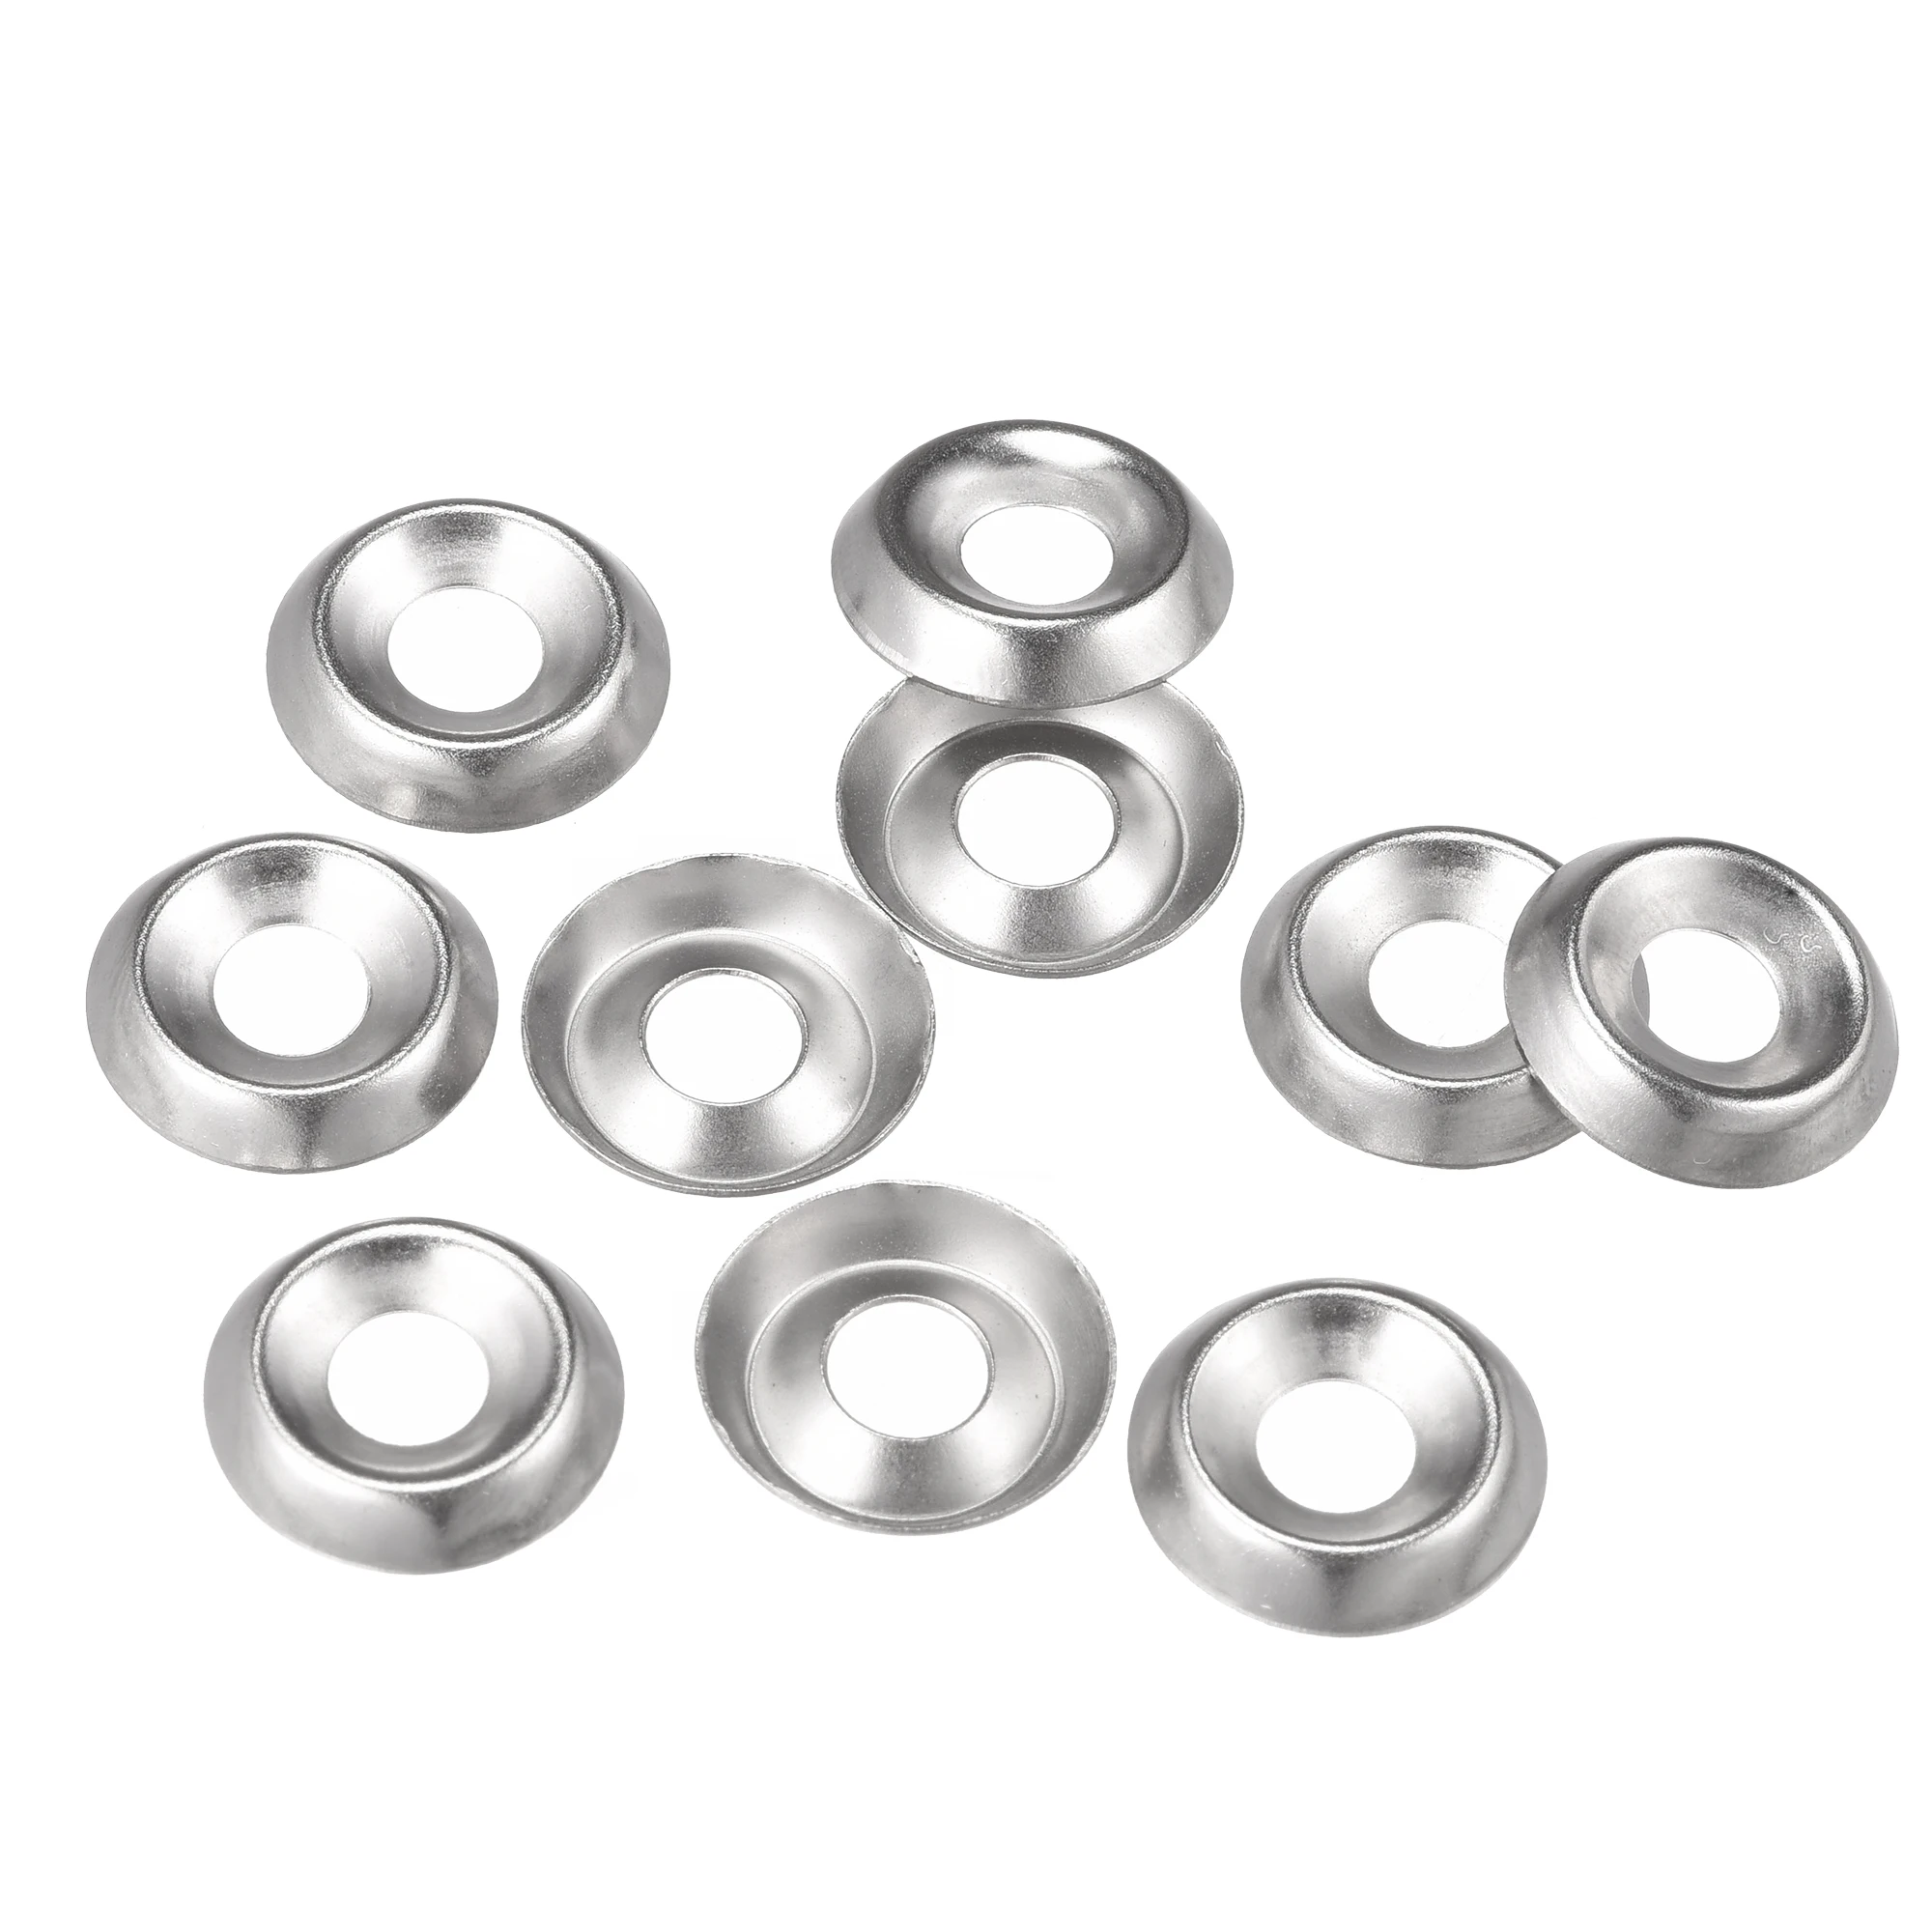 

Uxcell #10 304 Stainless Steel Cup Washer Countersunk for Screw Bolt 50pcs